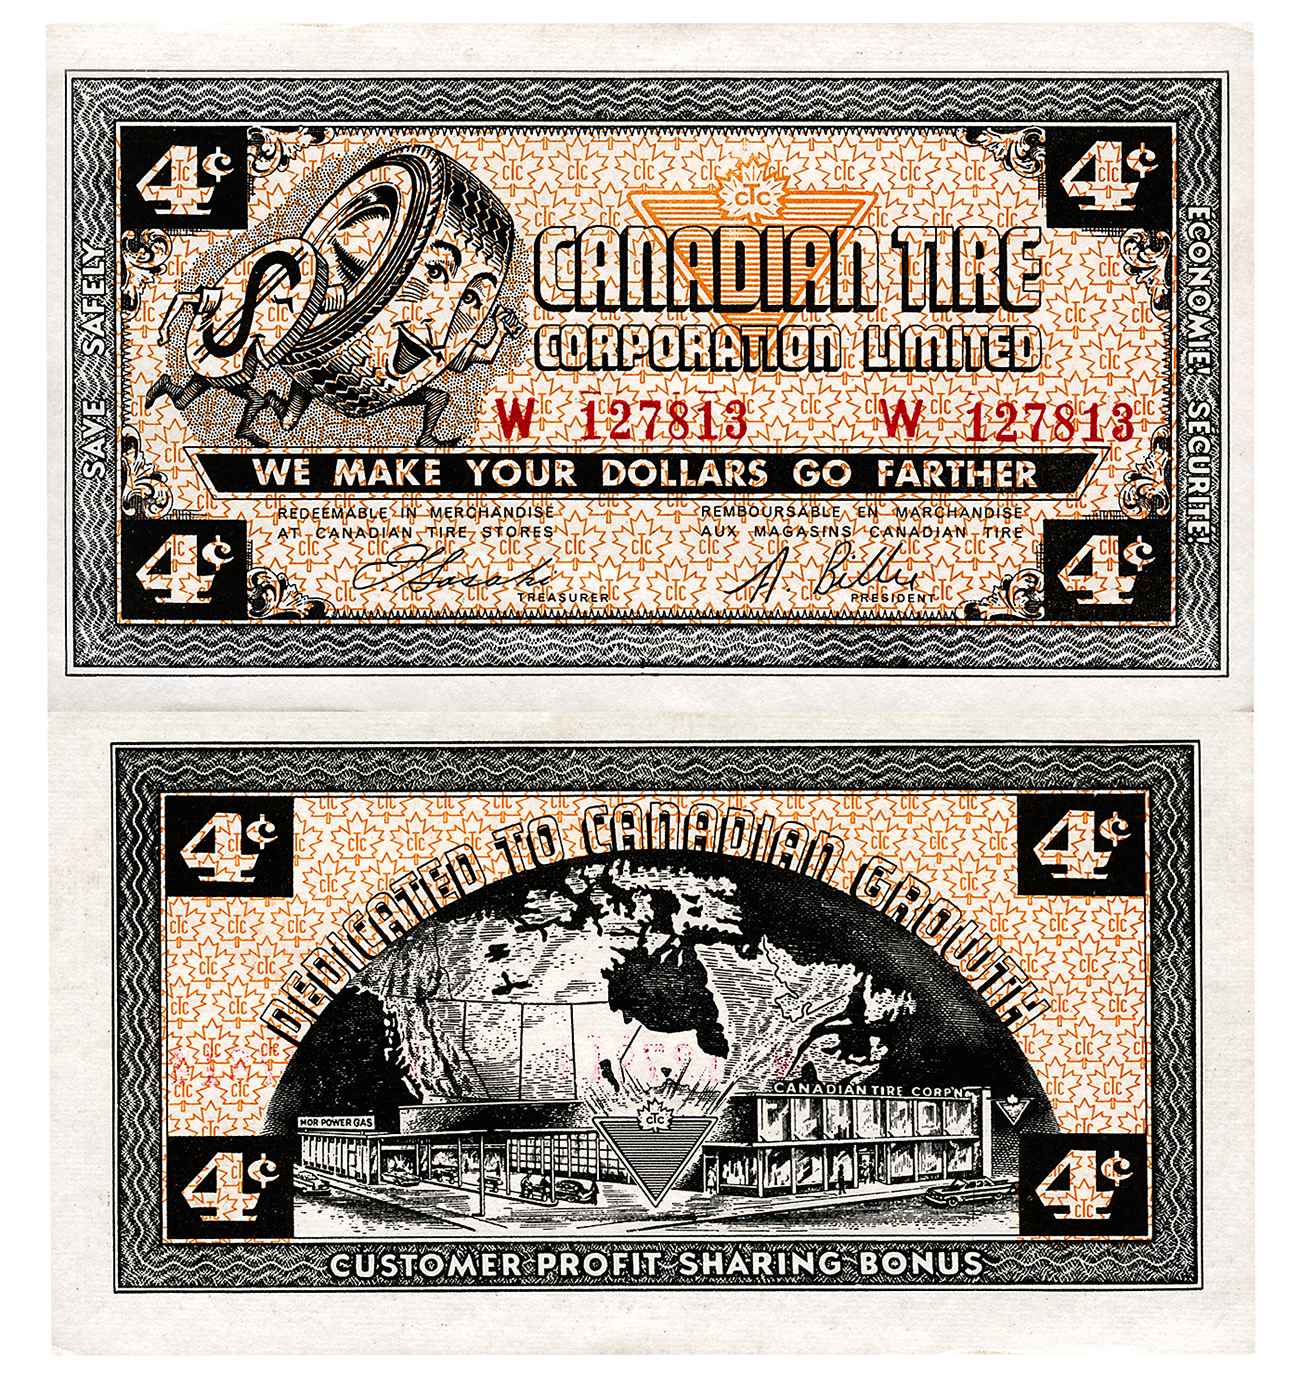 New Acquisitions - Bank of Canada Museum